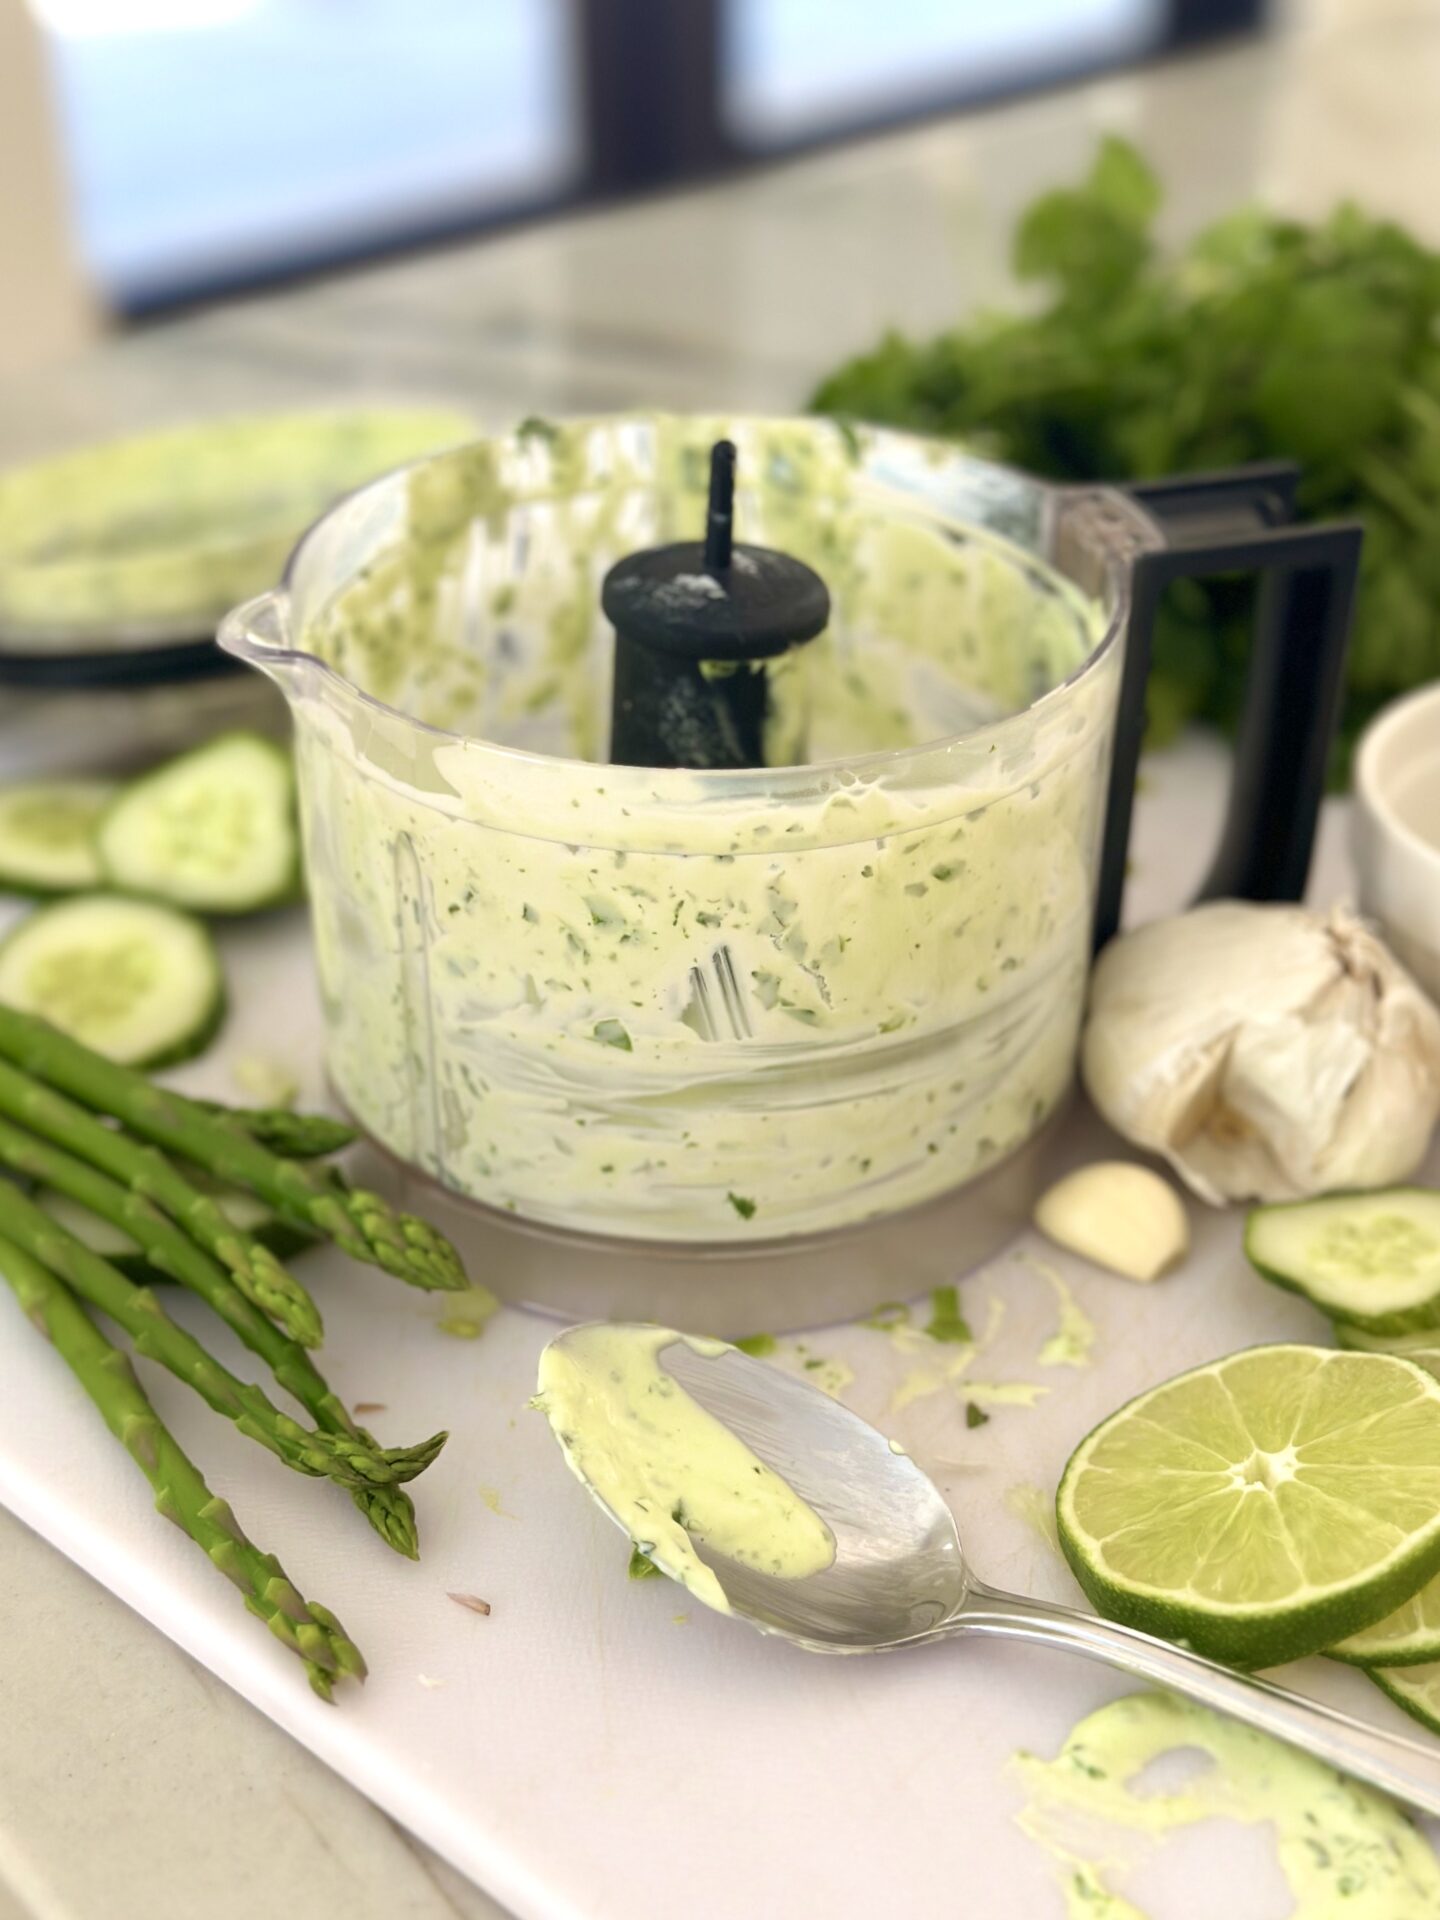 The bowl of a food processor is seen filled with creamy herb dip and surrounded by asparagus, lime, cucumber and fresh herbs